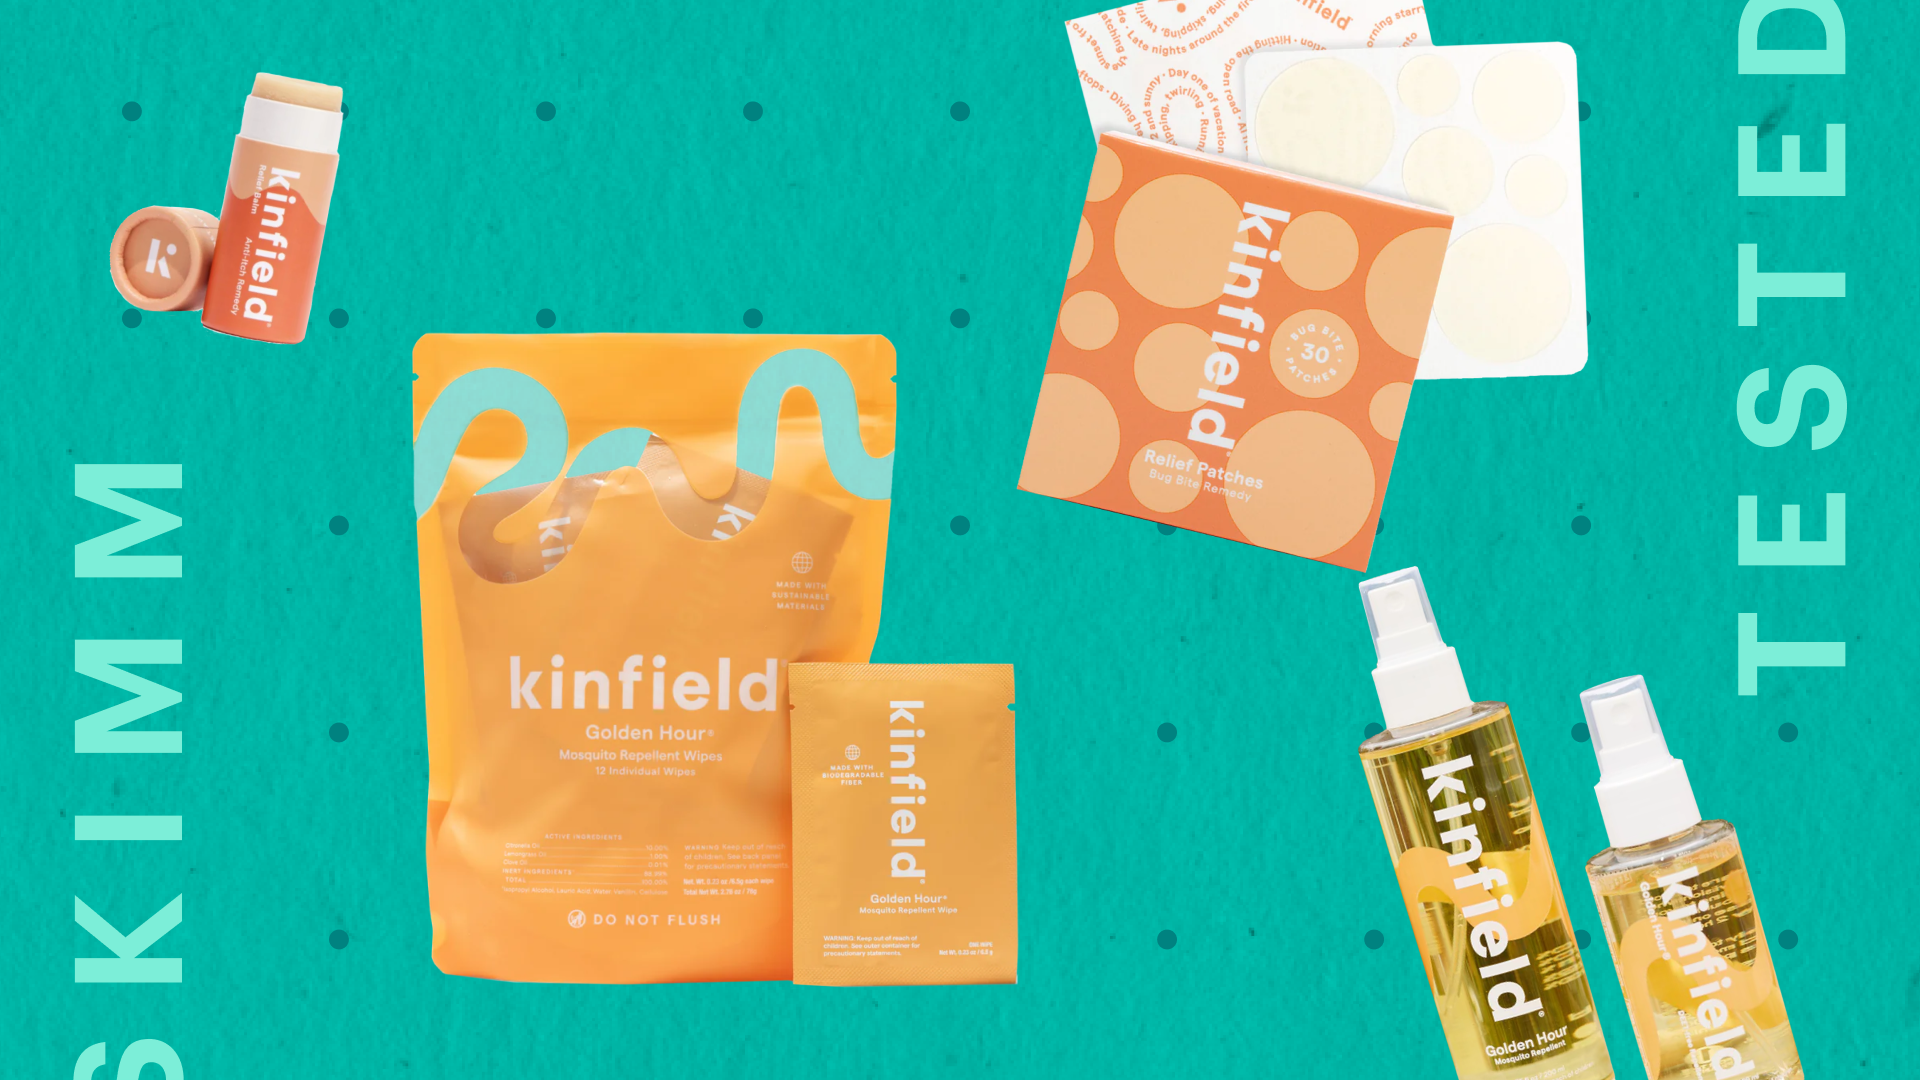 kinfield bug repellent spray and wipes and anti-itch relief patches